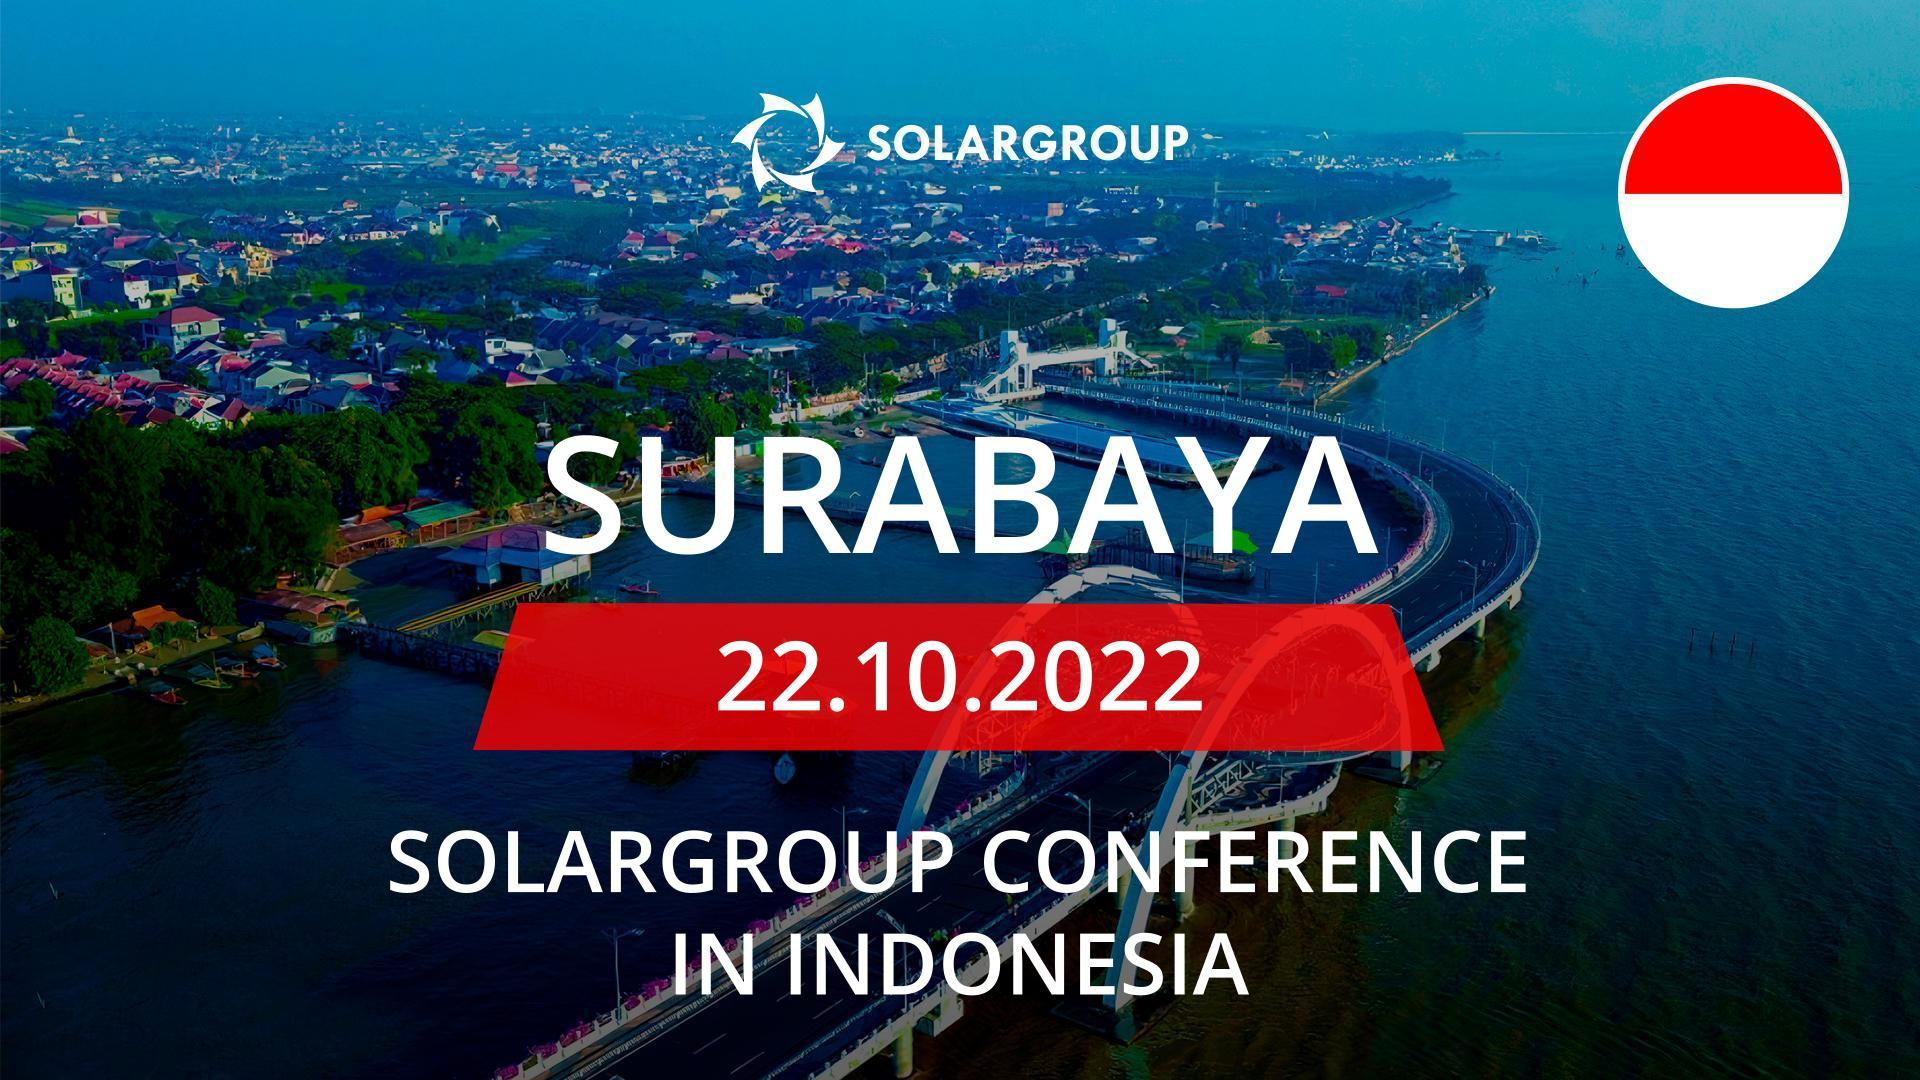 SOLARGROUP conference in Indonesia: October 22, Surabaya